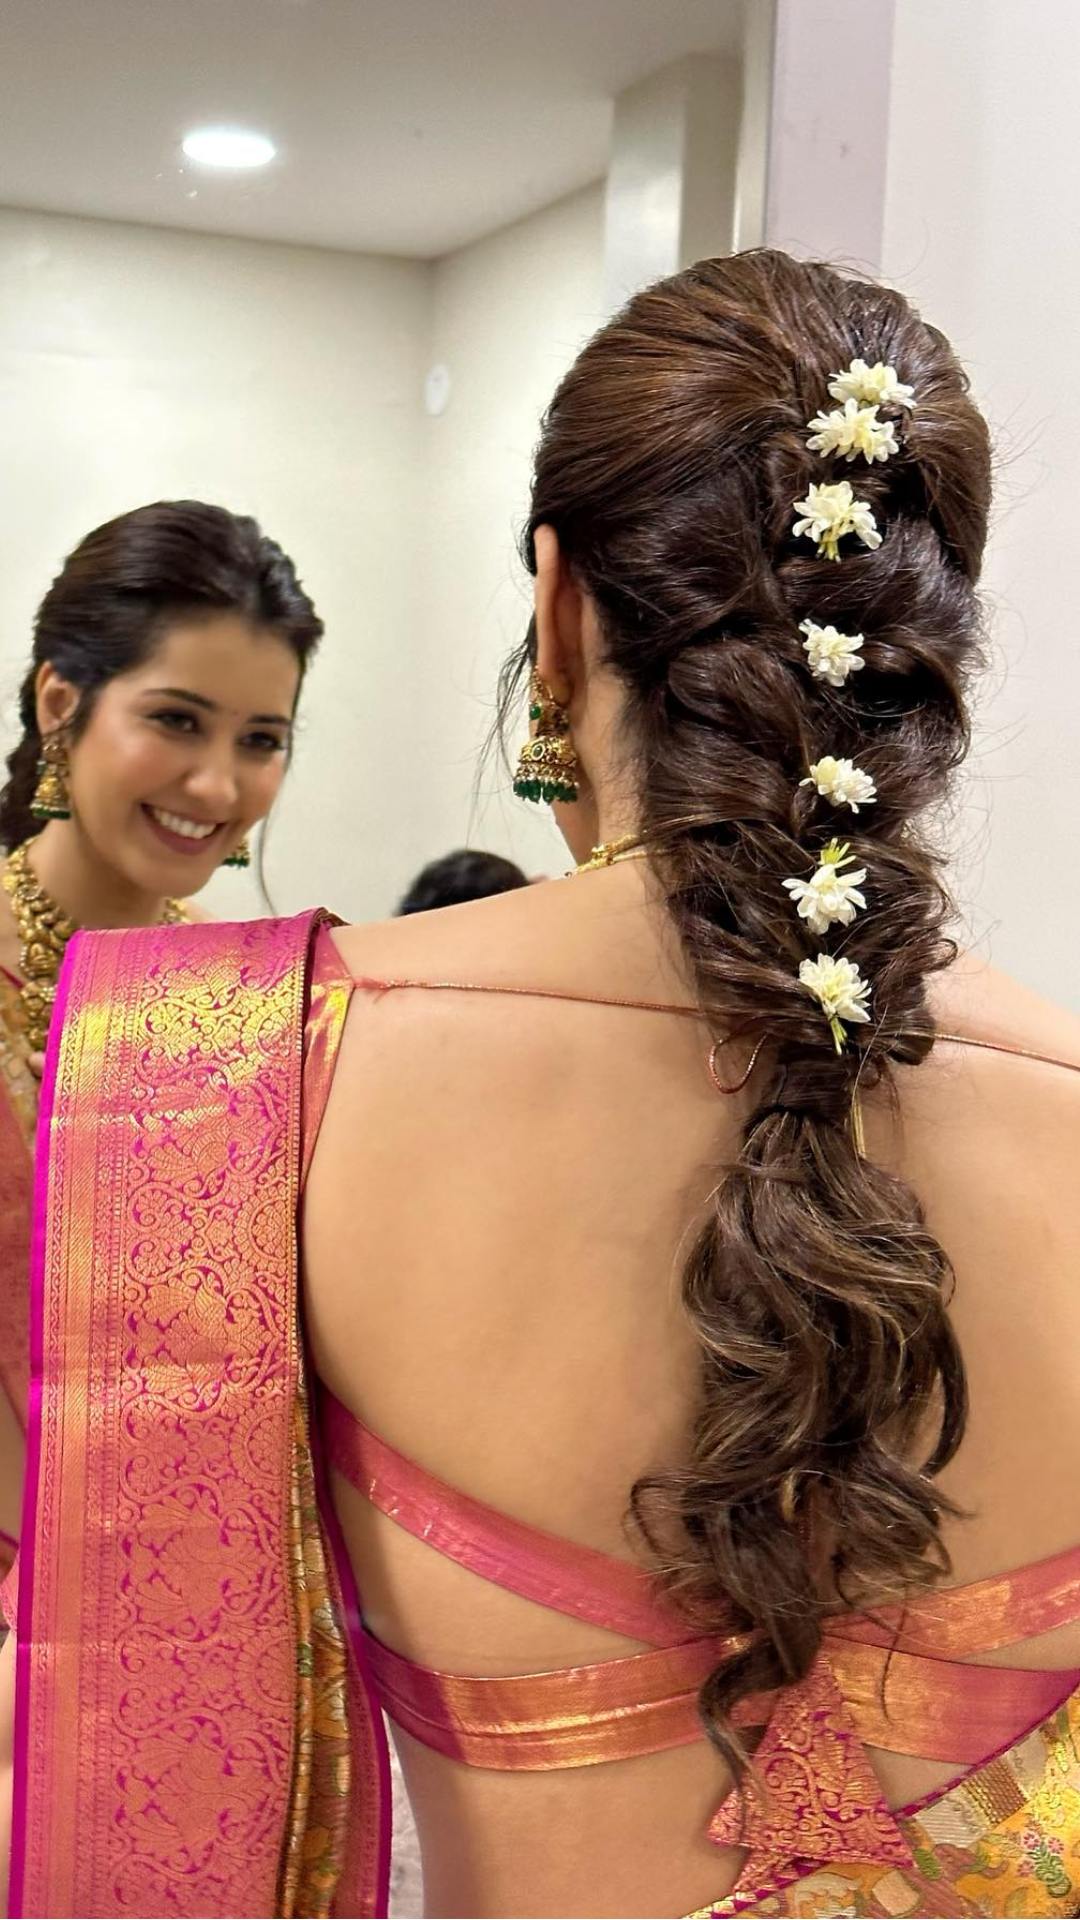 Hairstyles for saree (wedding function or party): From Messy Buns to Open  Hair, Long and Short Styles, Ambada, and Paithani Saree Hairstyles –  News9Live